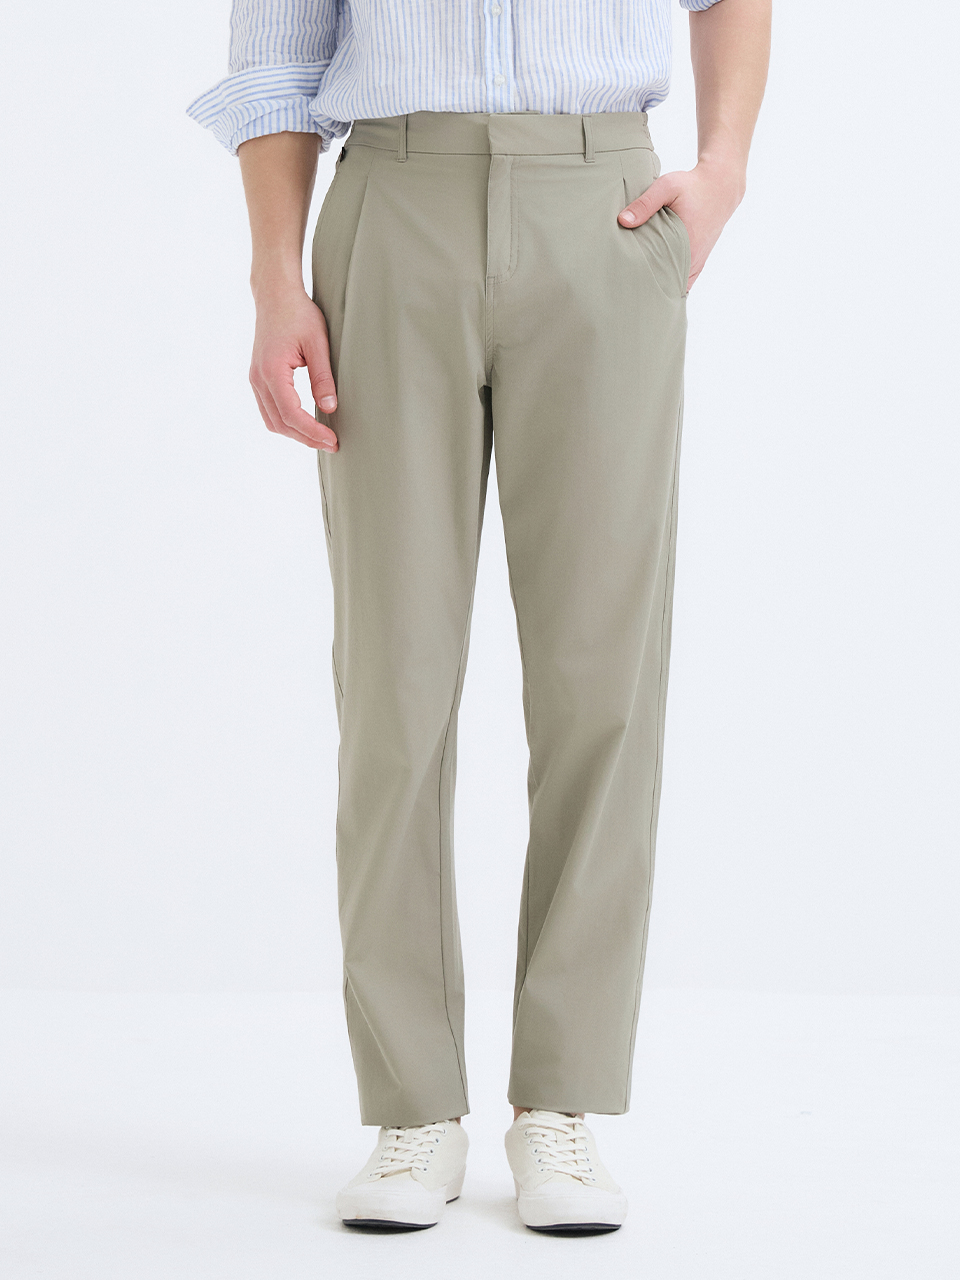 NEW SIGNATURE PERFECT FIT COLLPANTS (FOR MEN) - SAND GREY